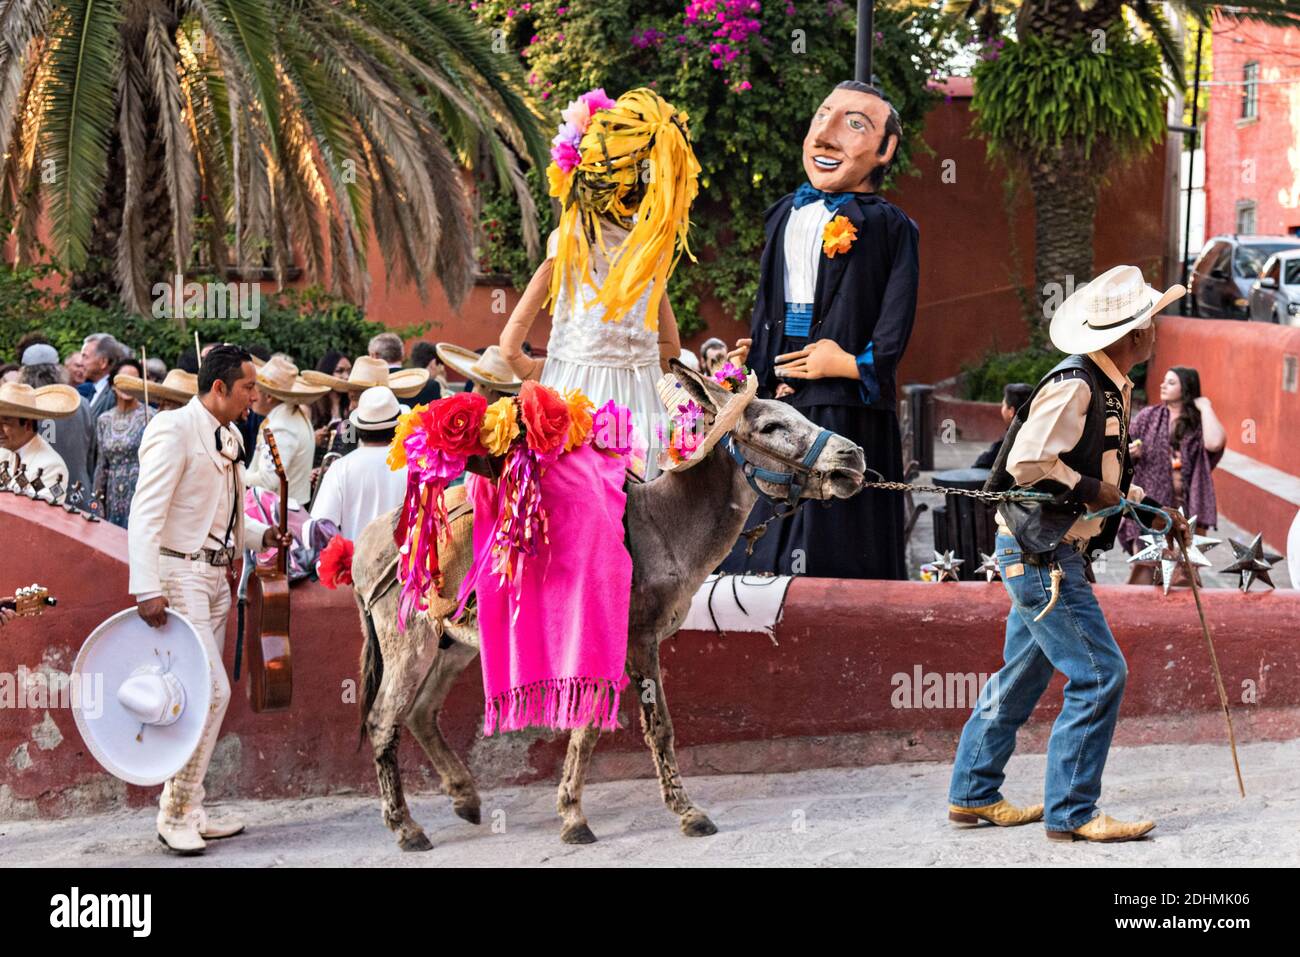 A traditional Mexican mariachi band plays as giant puppets called mojigangas dance during a wedding celebration in the Lavaderos del Chorro park in San Miguel de Allende, Guanajuato, Mexico. Stock Photo